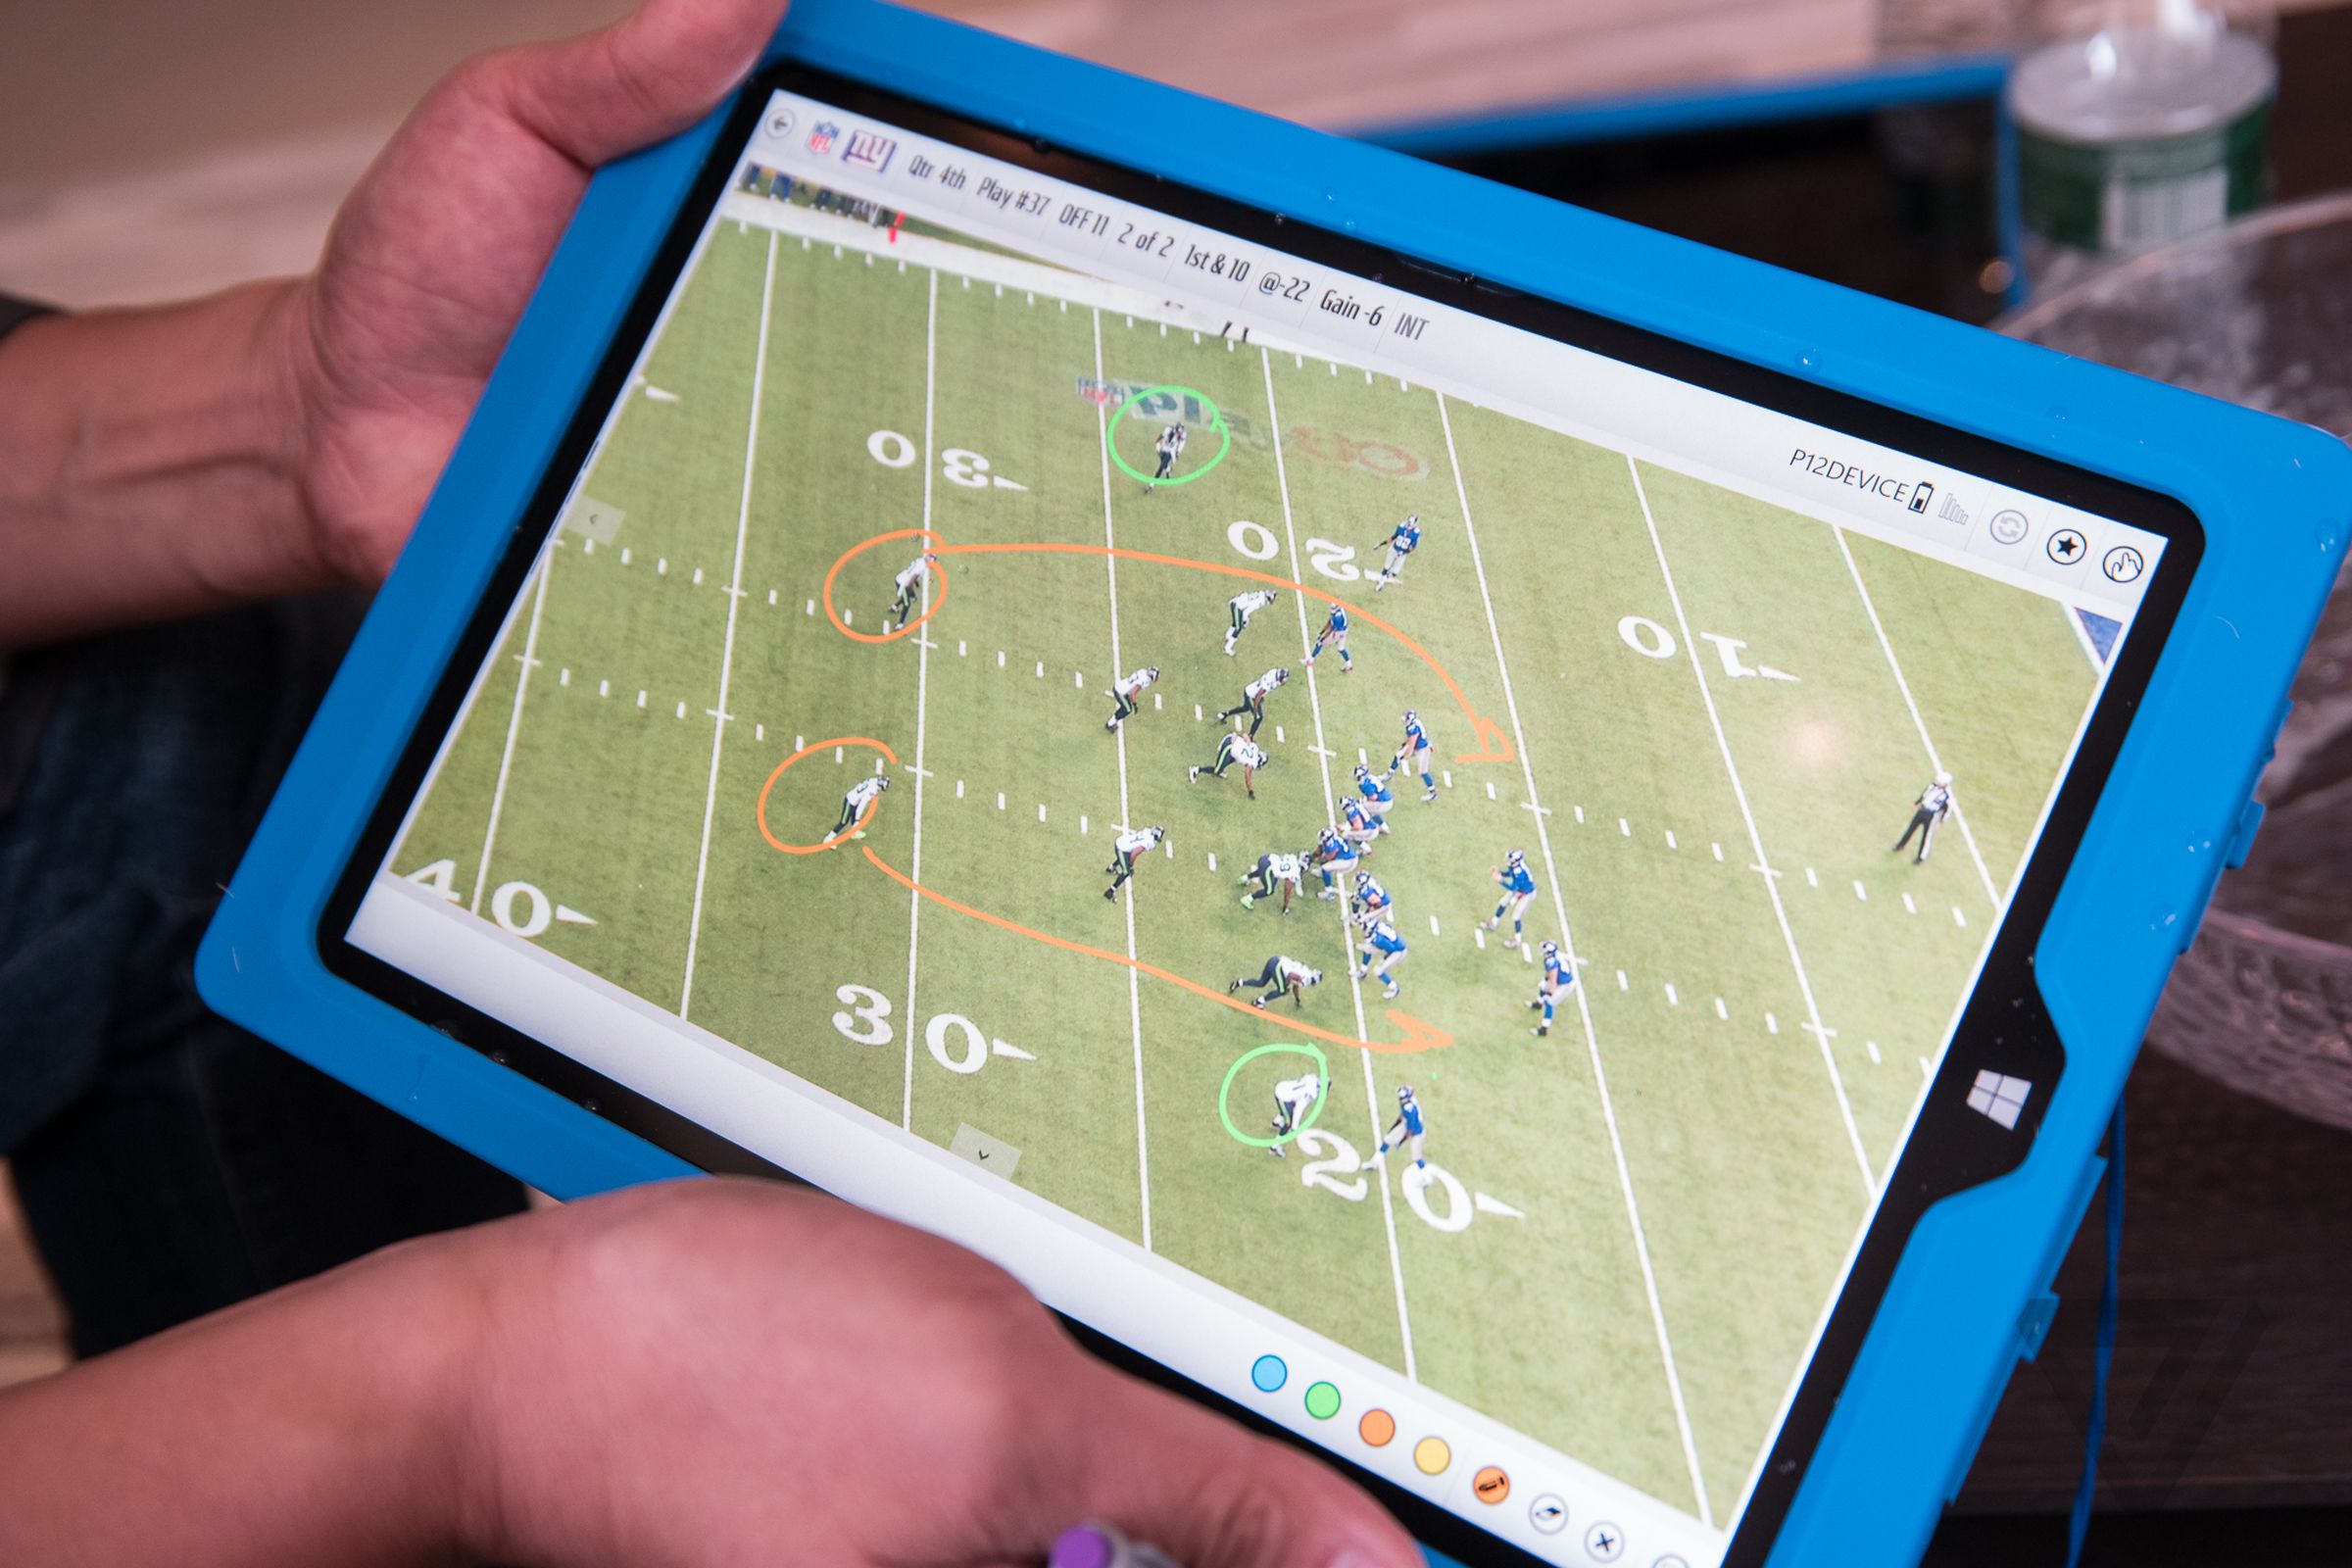 Surface Pro 3 for the NFL